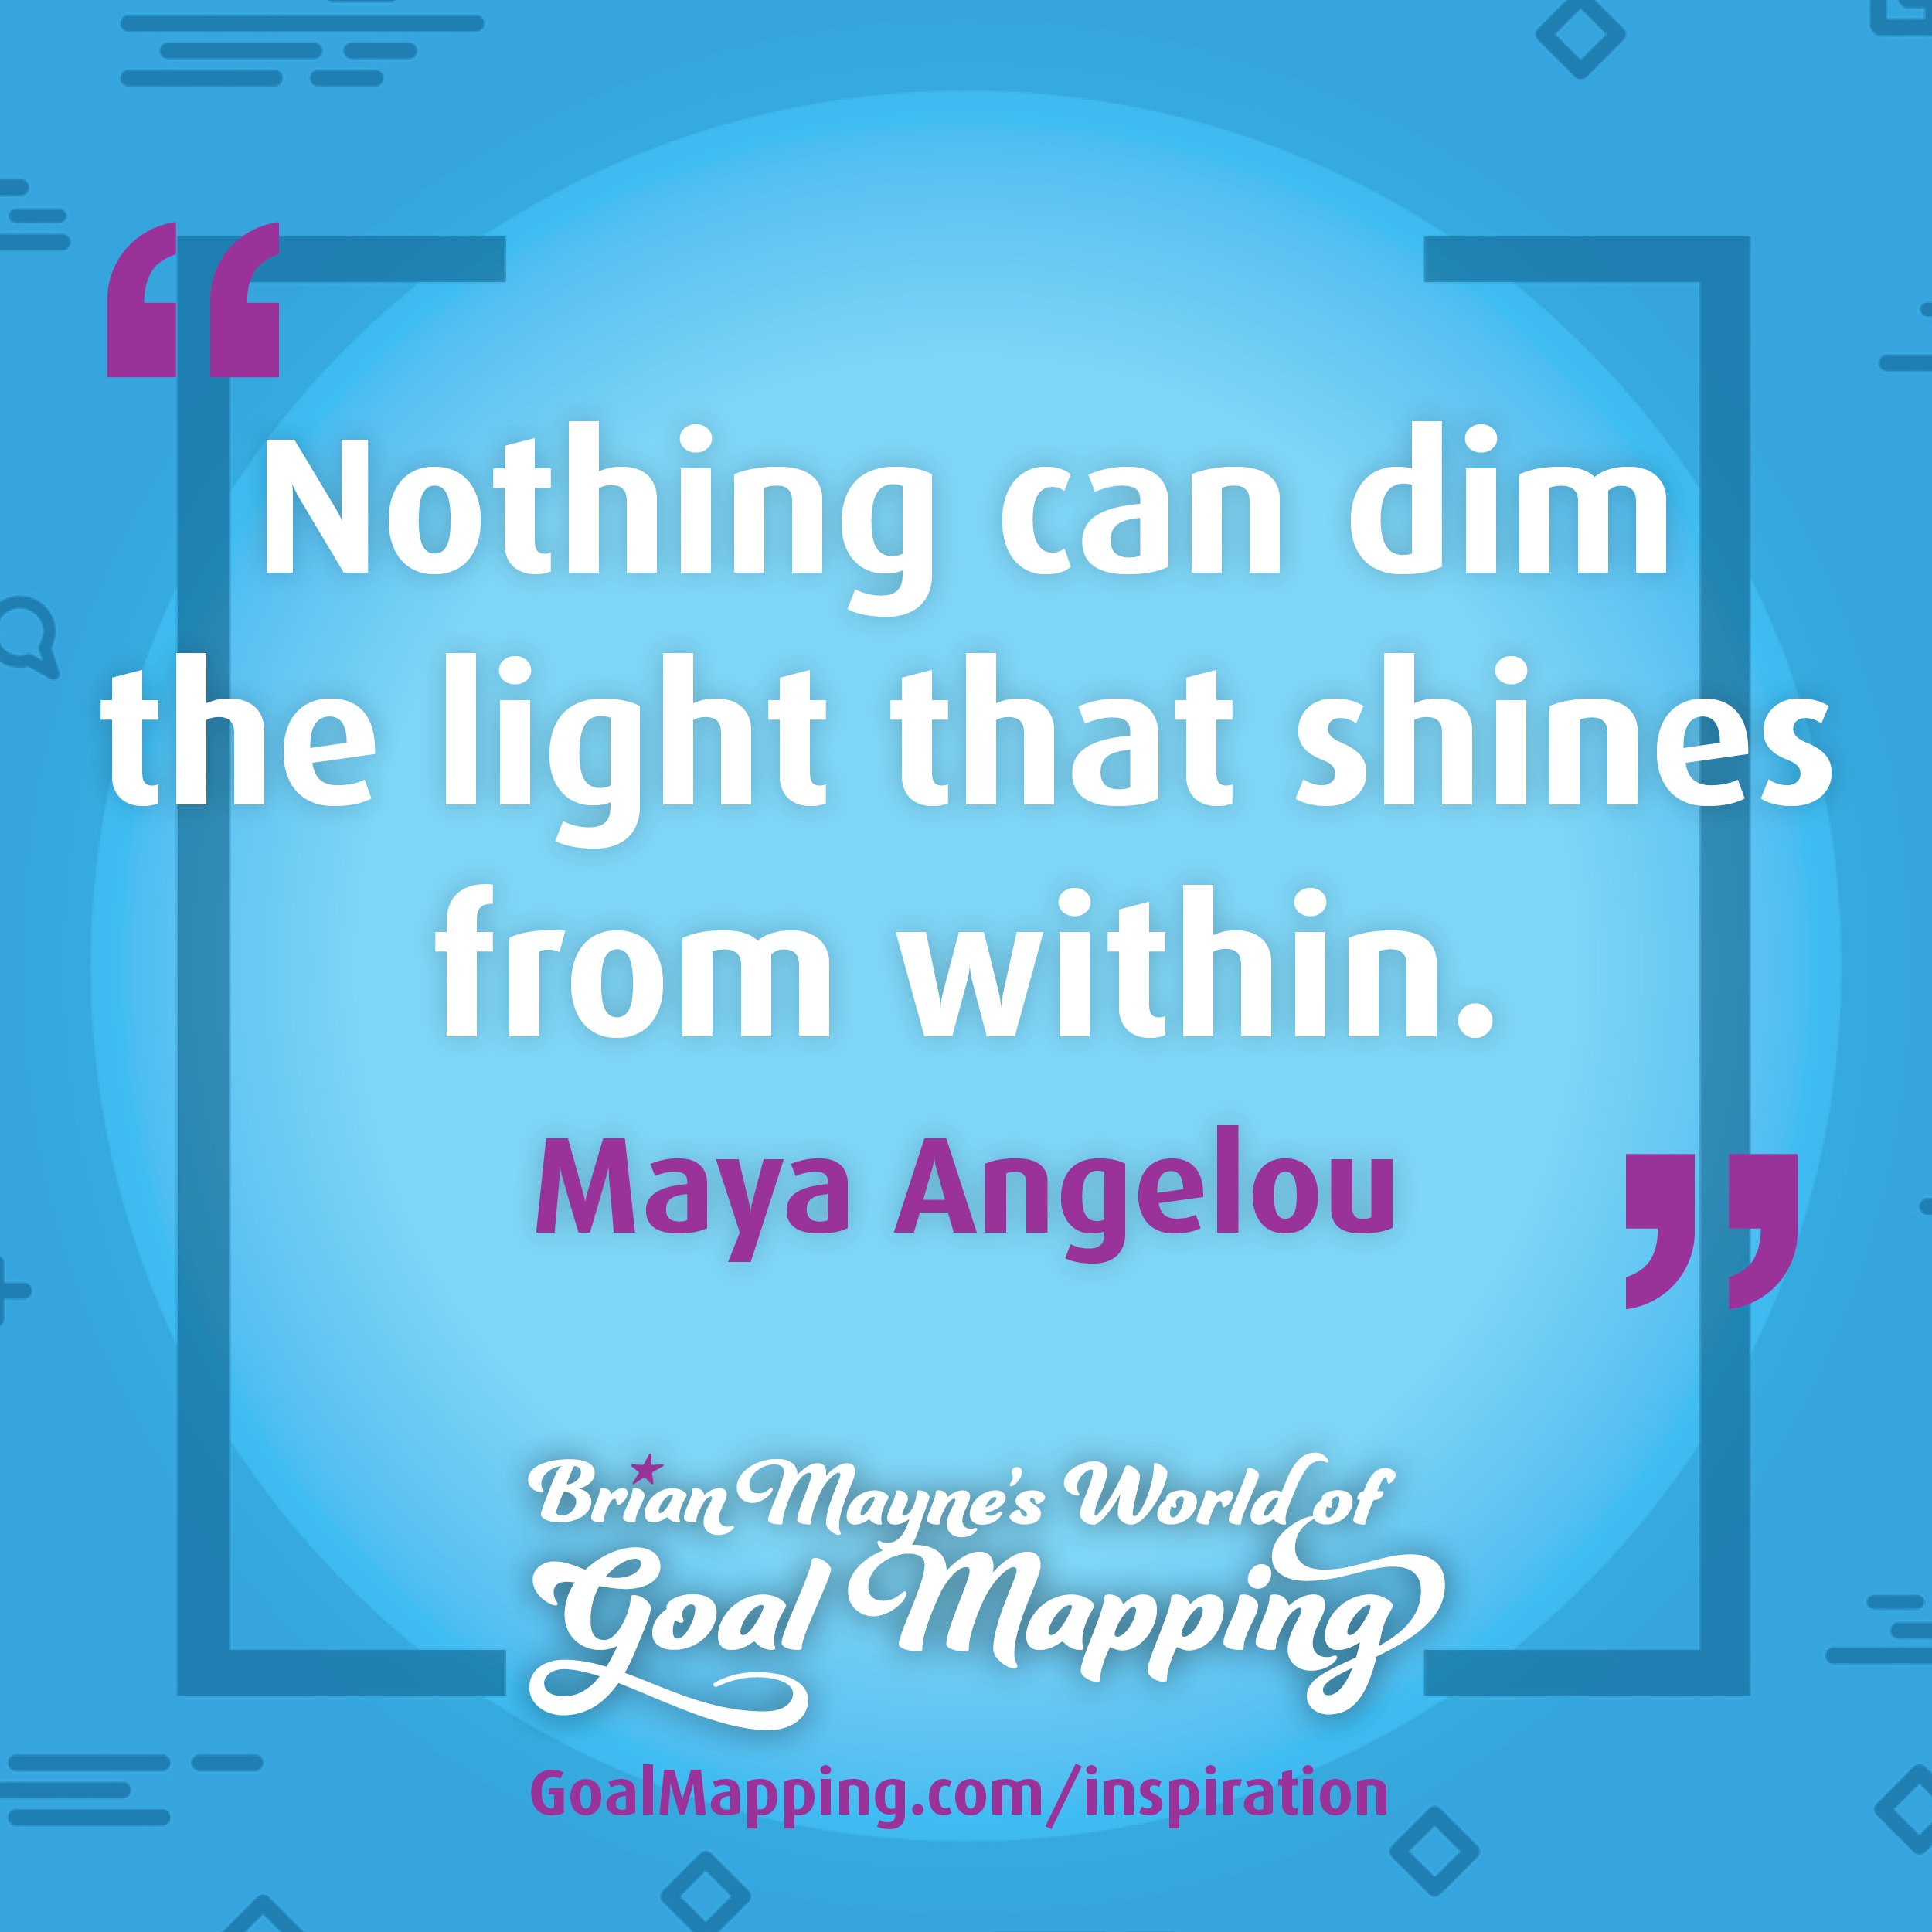 "Nothing can dim the light that shines from within." Maya Angelou